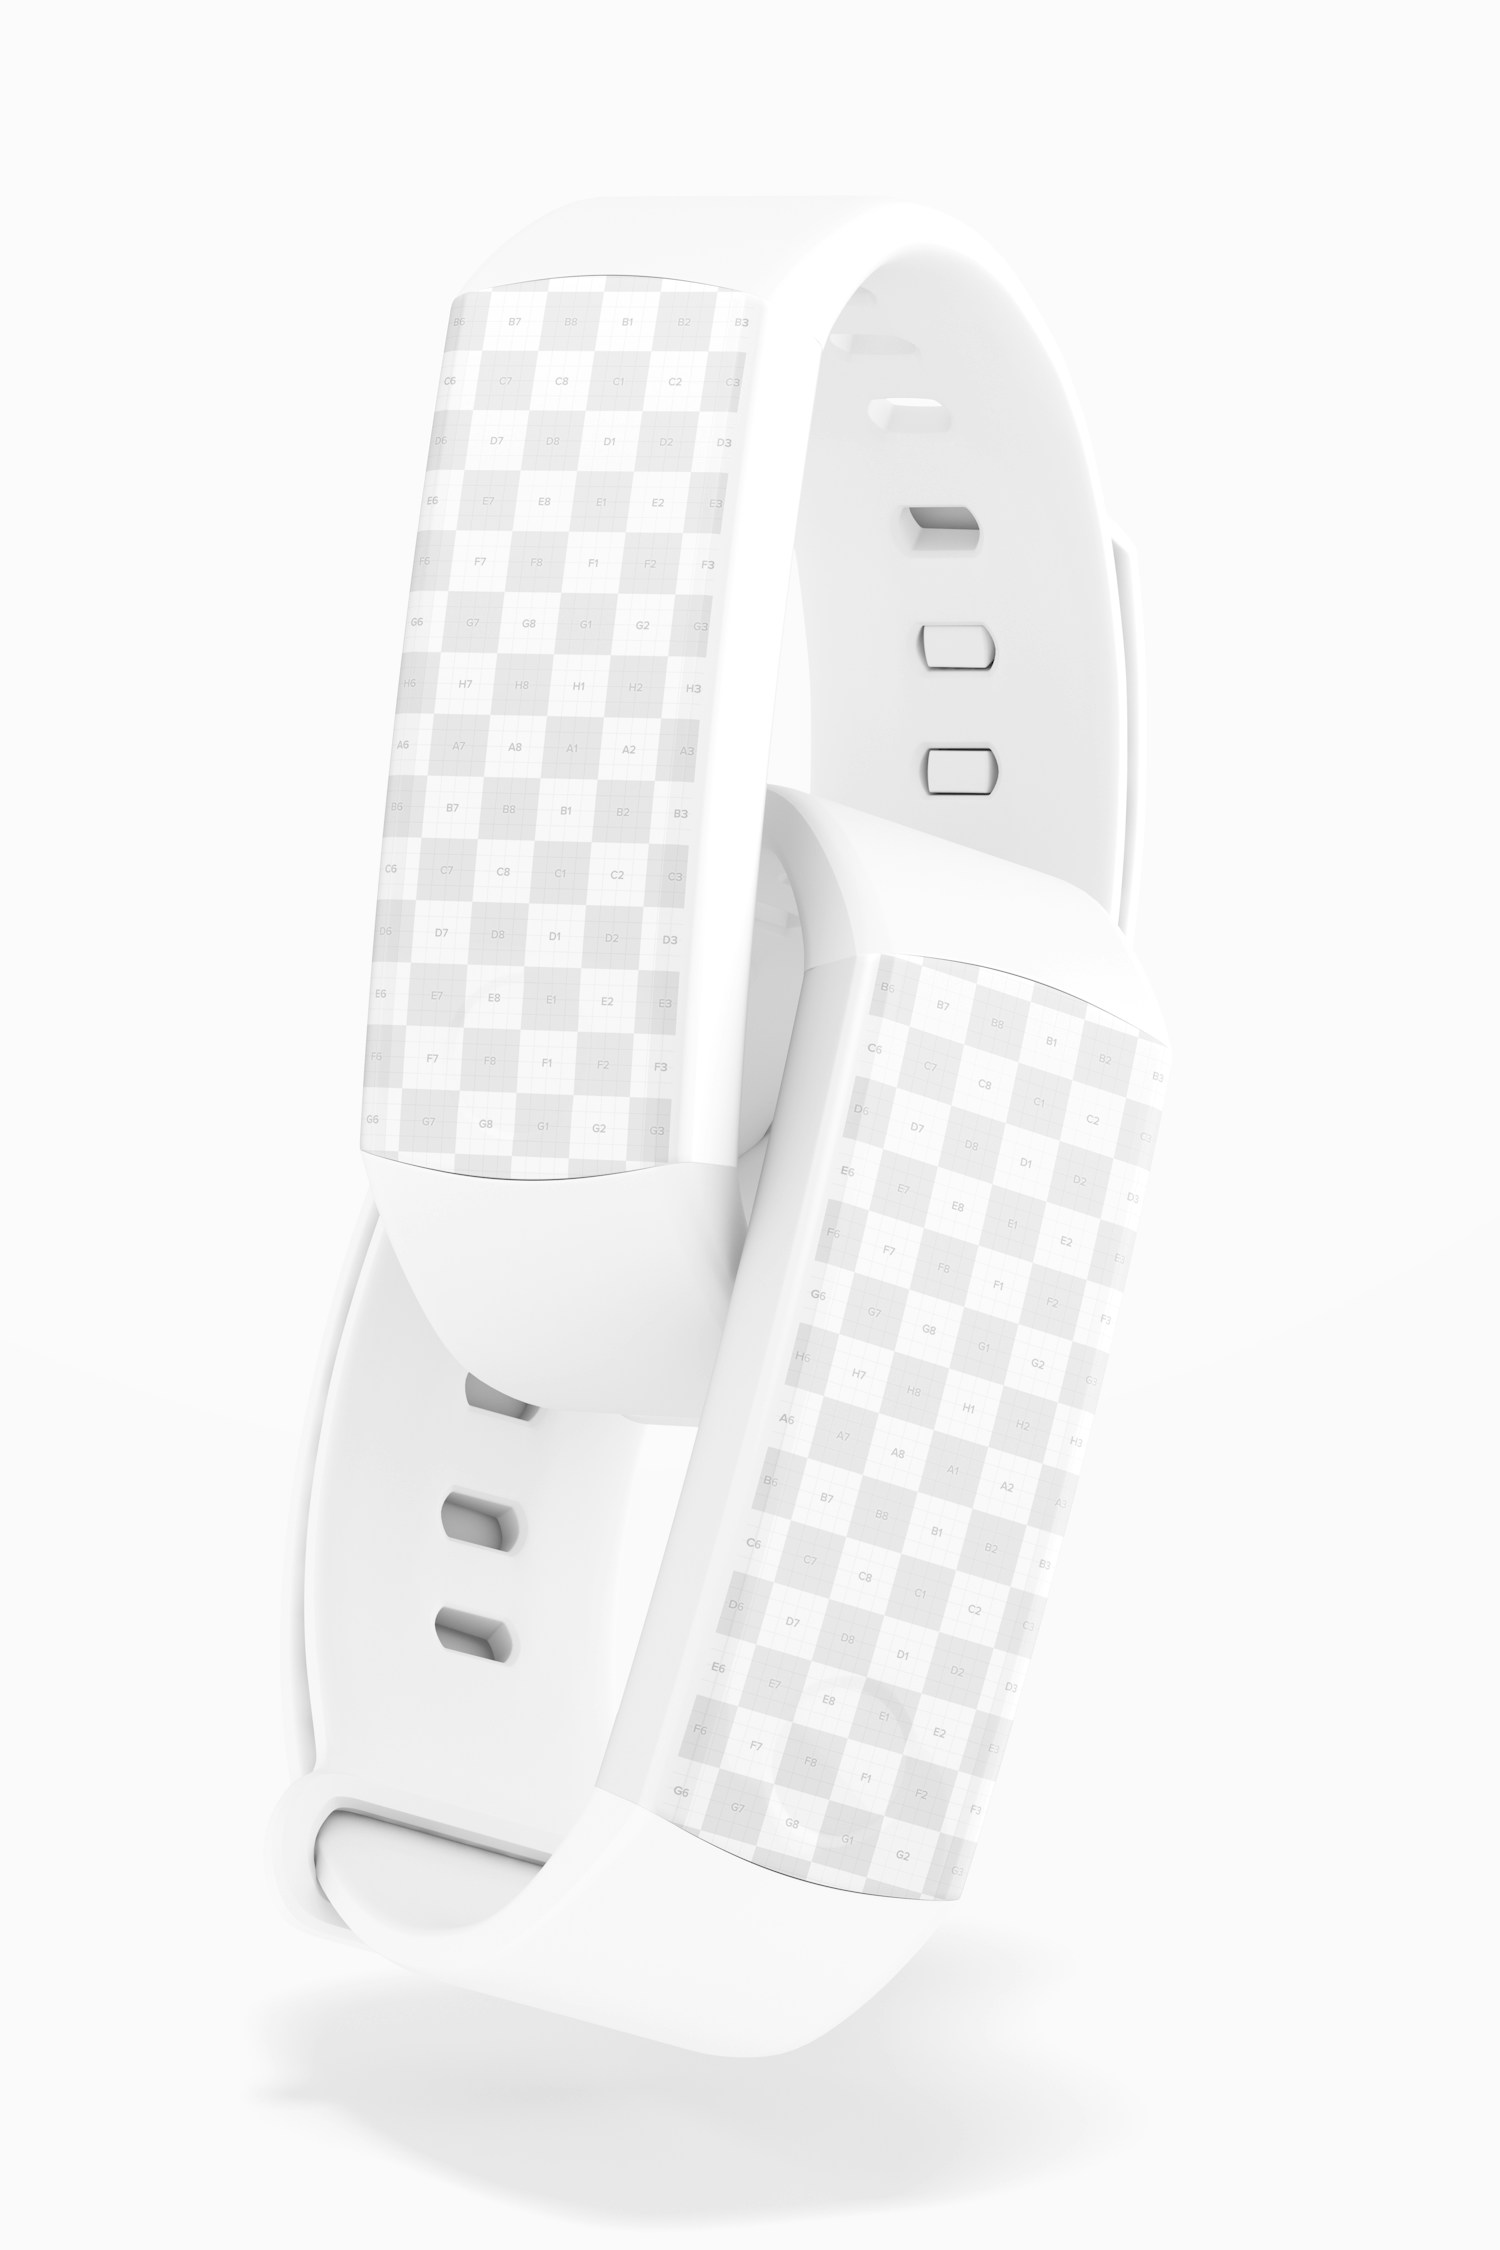 Huawei Fit Honor Band 3 Smart Watch Mockup, Floating